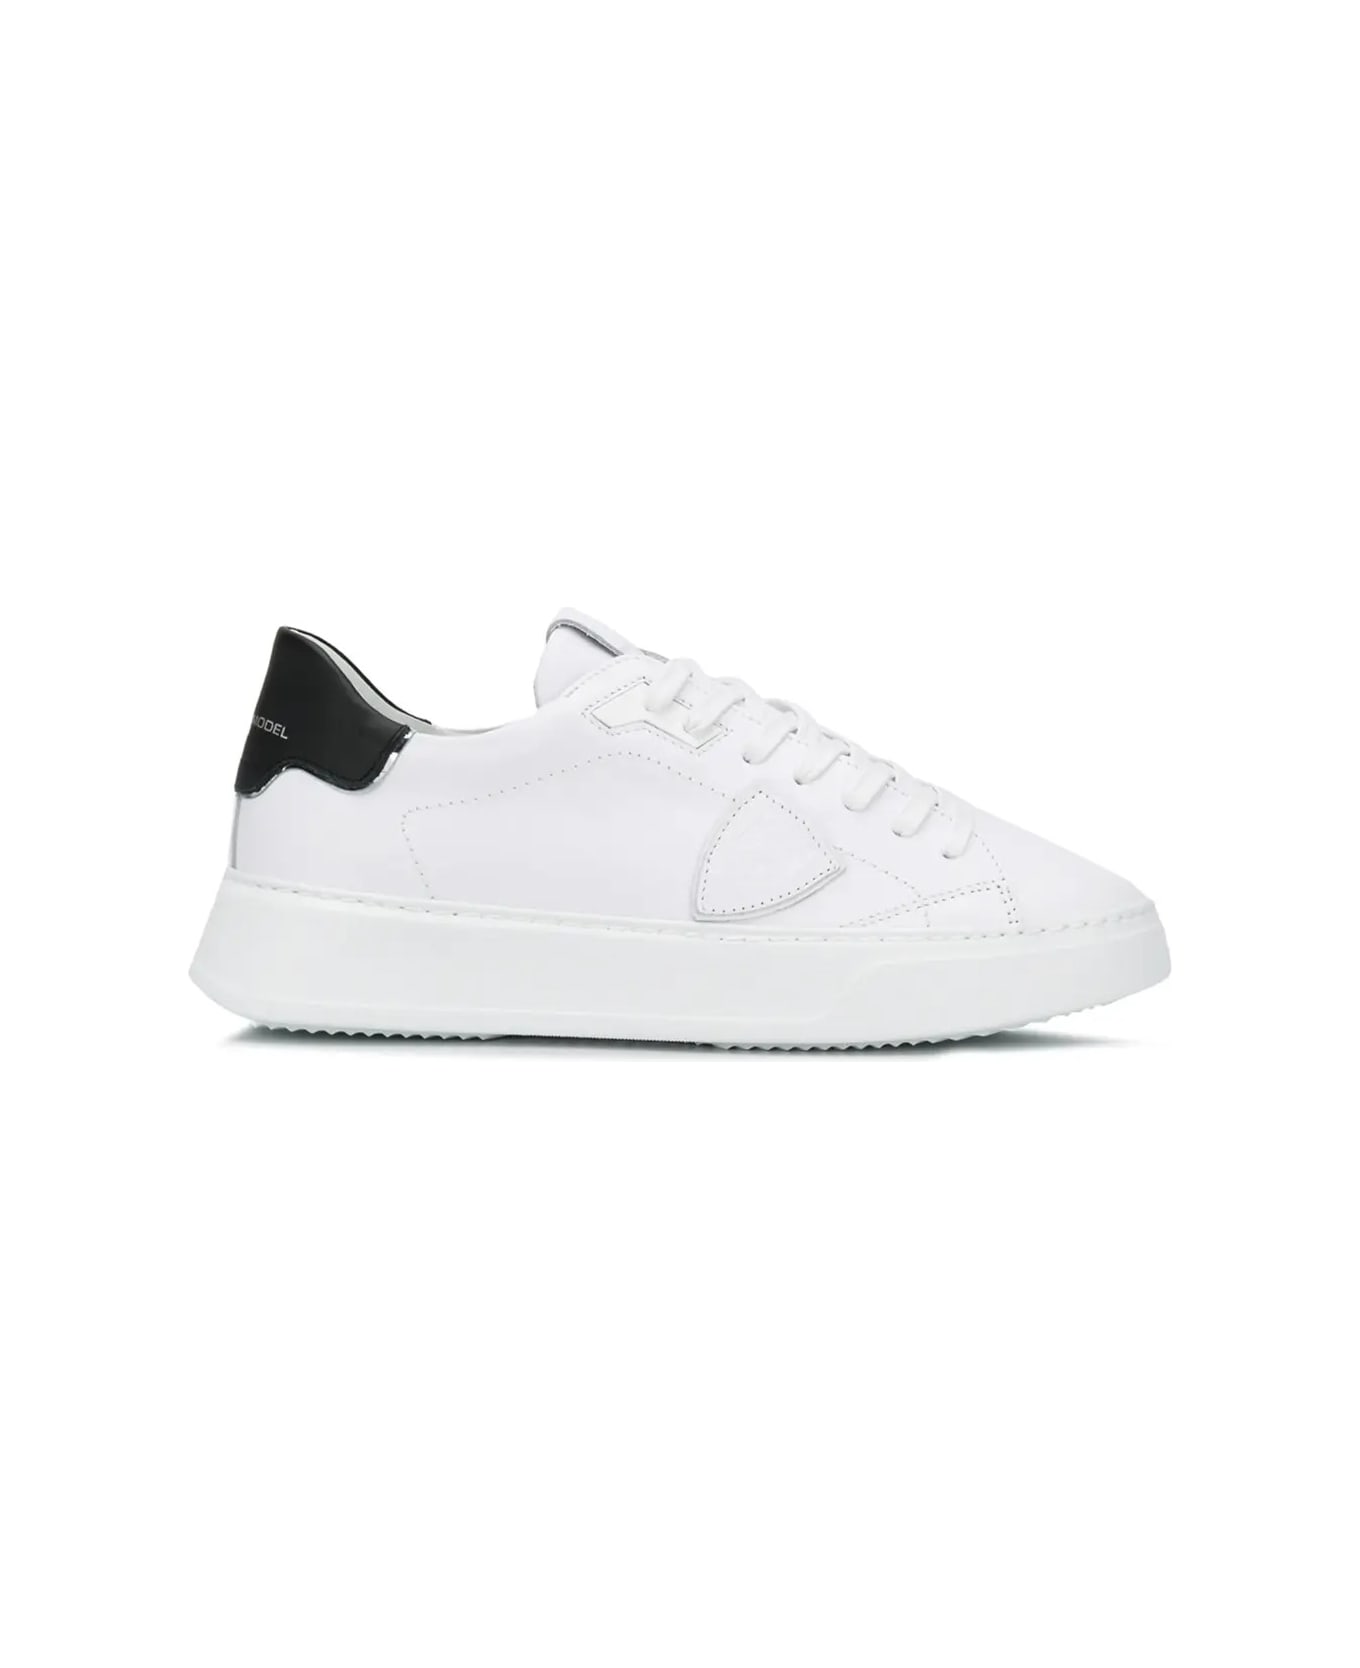 Philippe Model Temple Low Sneakers - White And Black - White